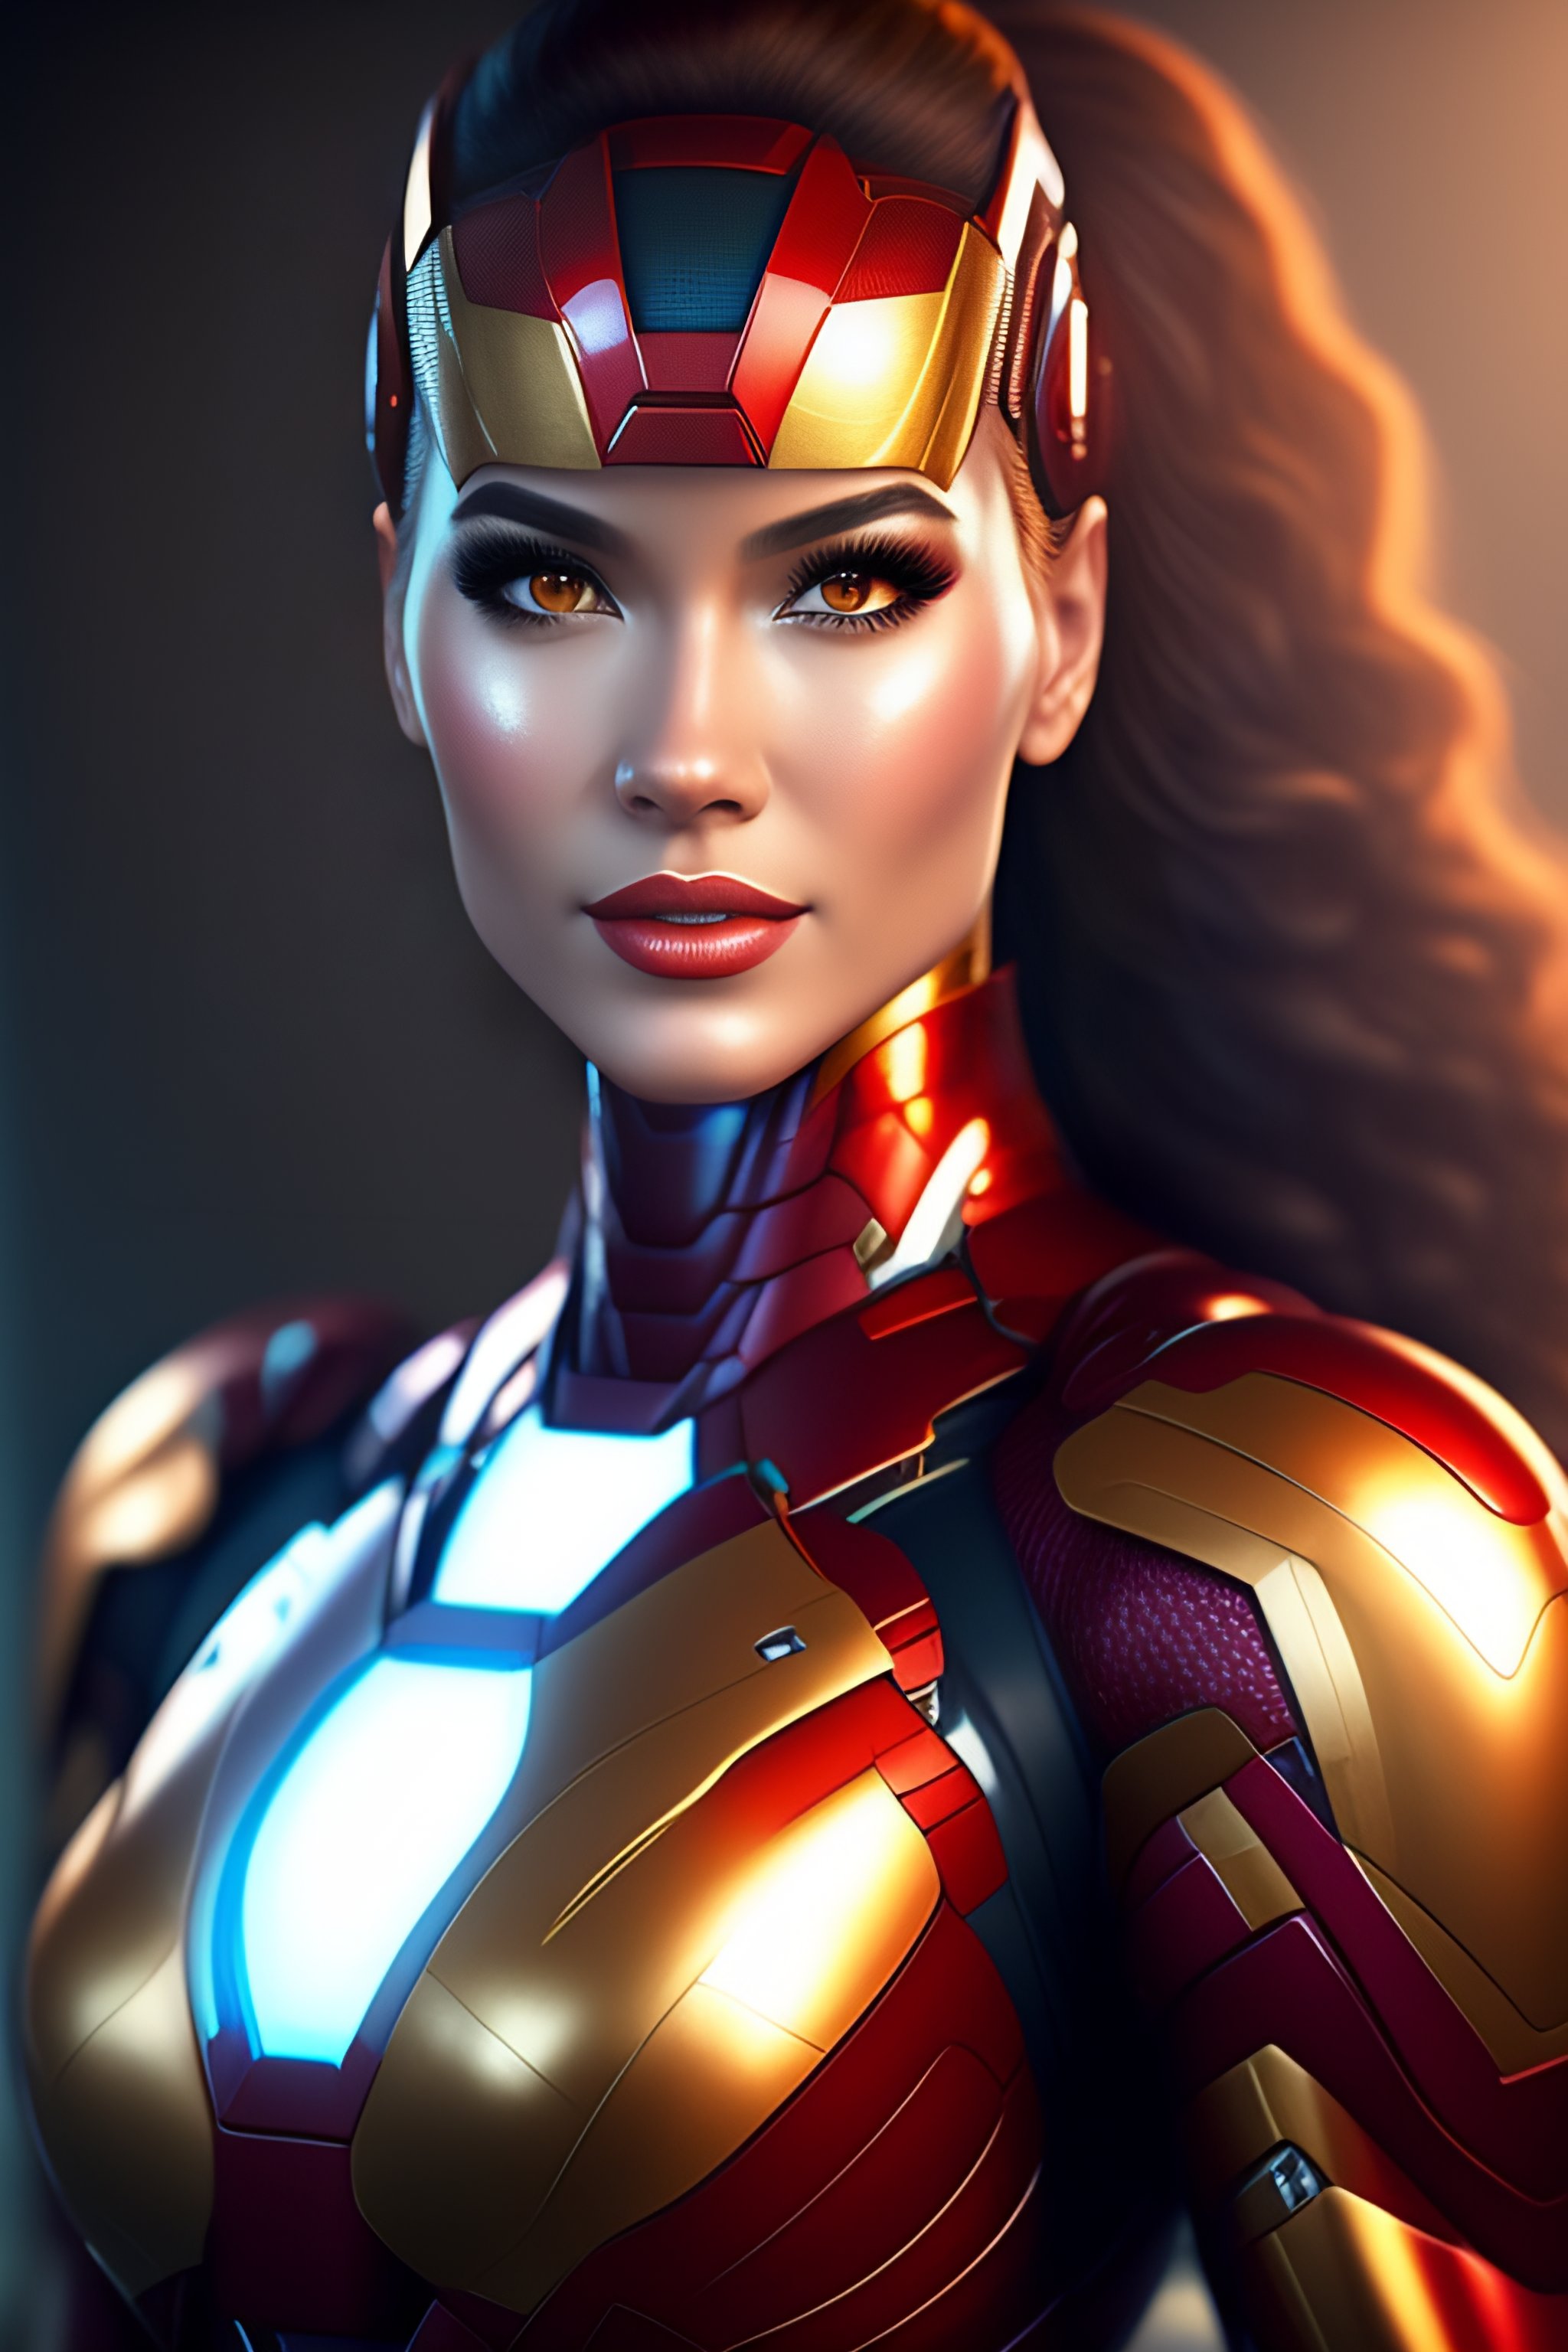 Lexica A Female Version Of Iron Man In Full Body View Dream Like Art Smooth Lighting 